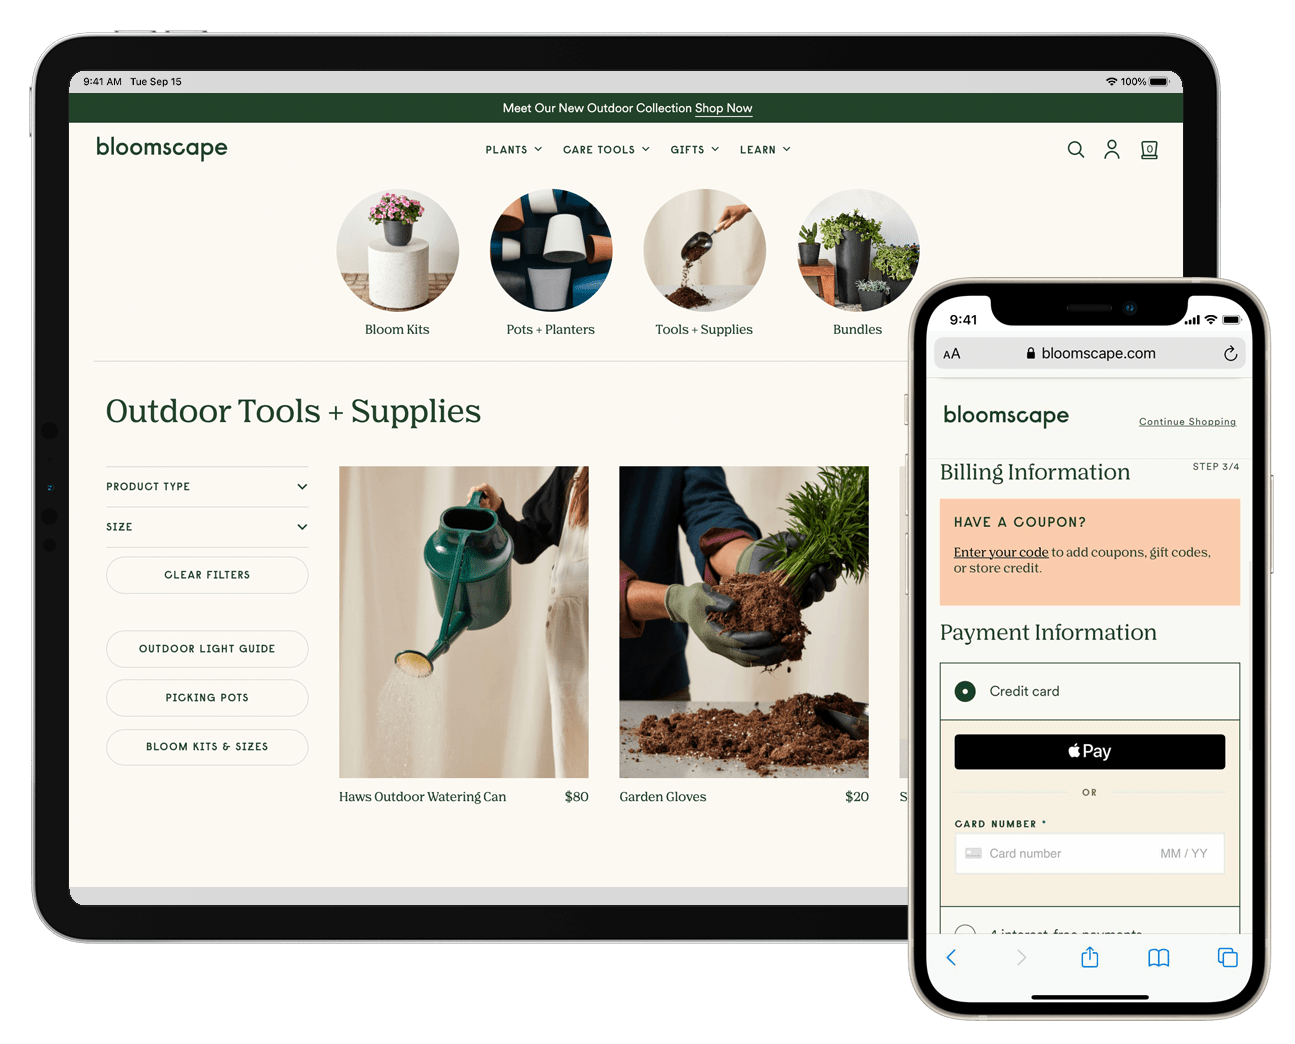 Bloomscape.com displayed on an iPad and iPhone with Apple Pay as a checkout option.